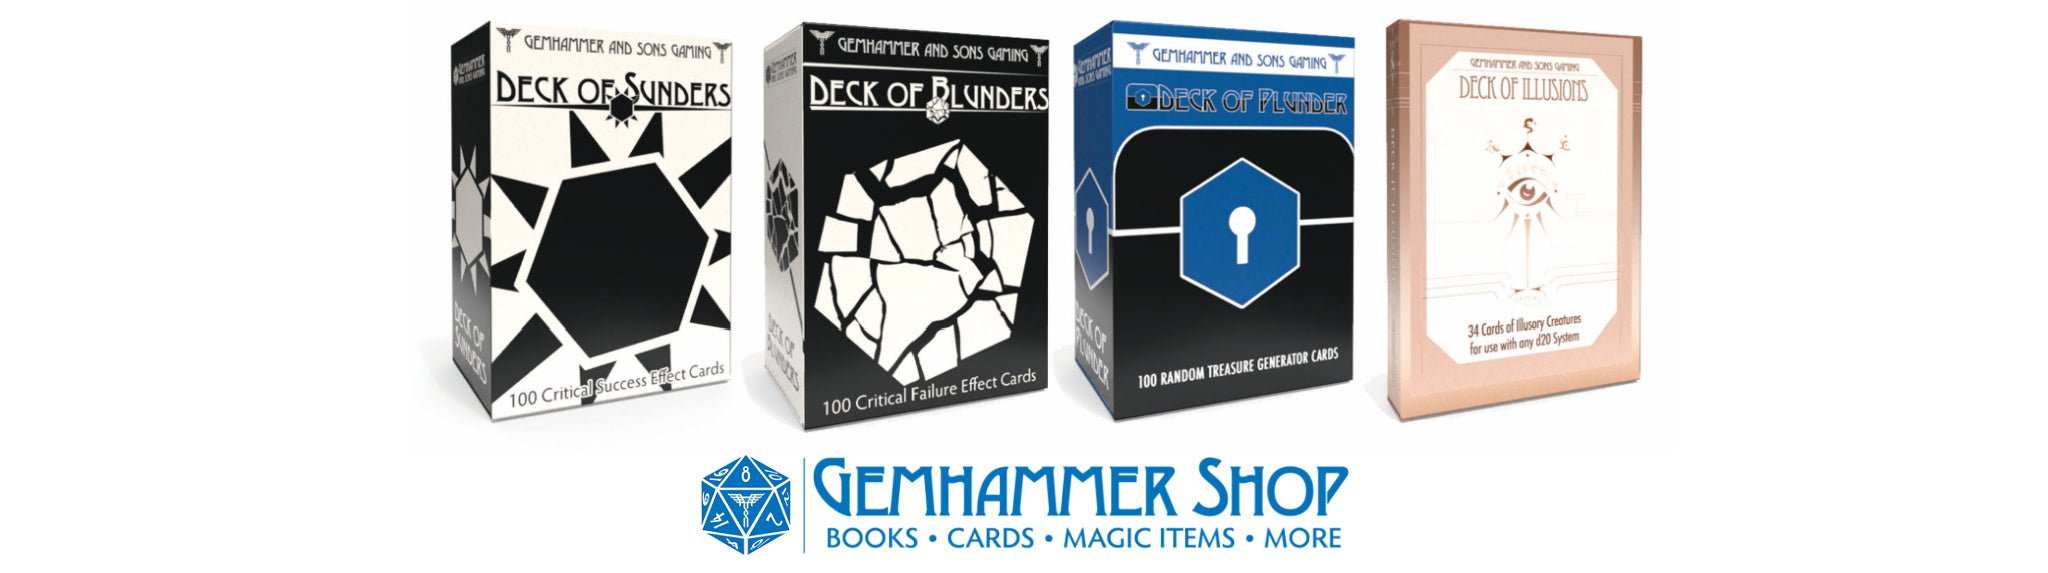 Decks of Other – Gemhammer and Sons